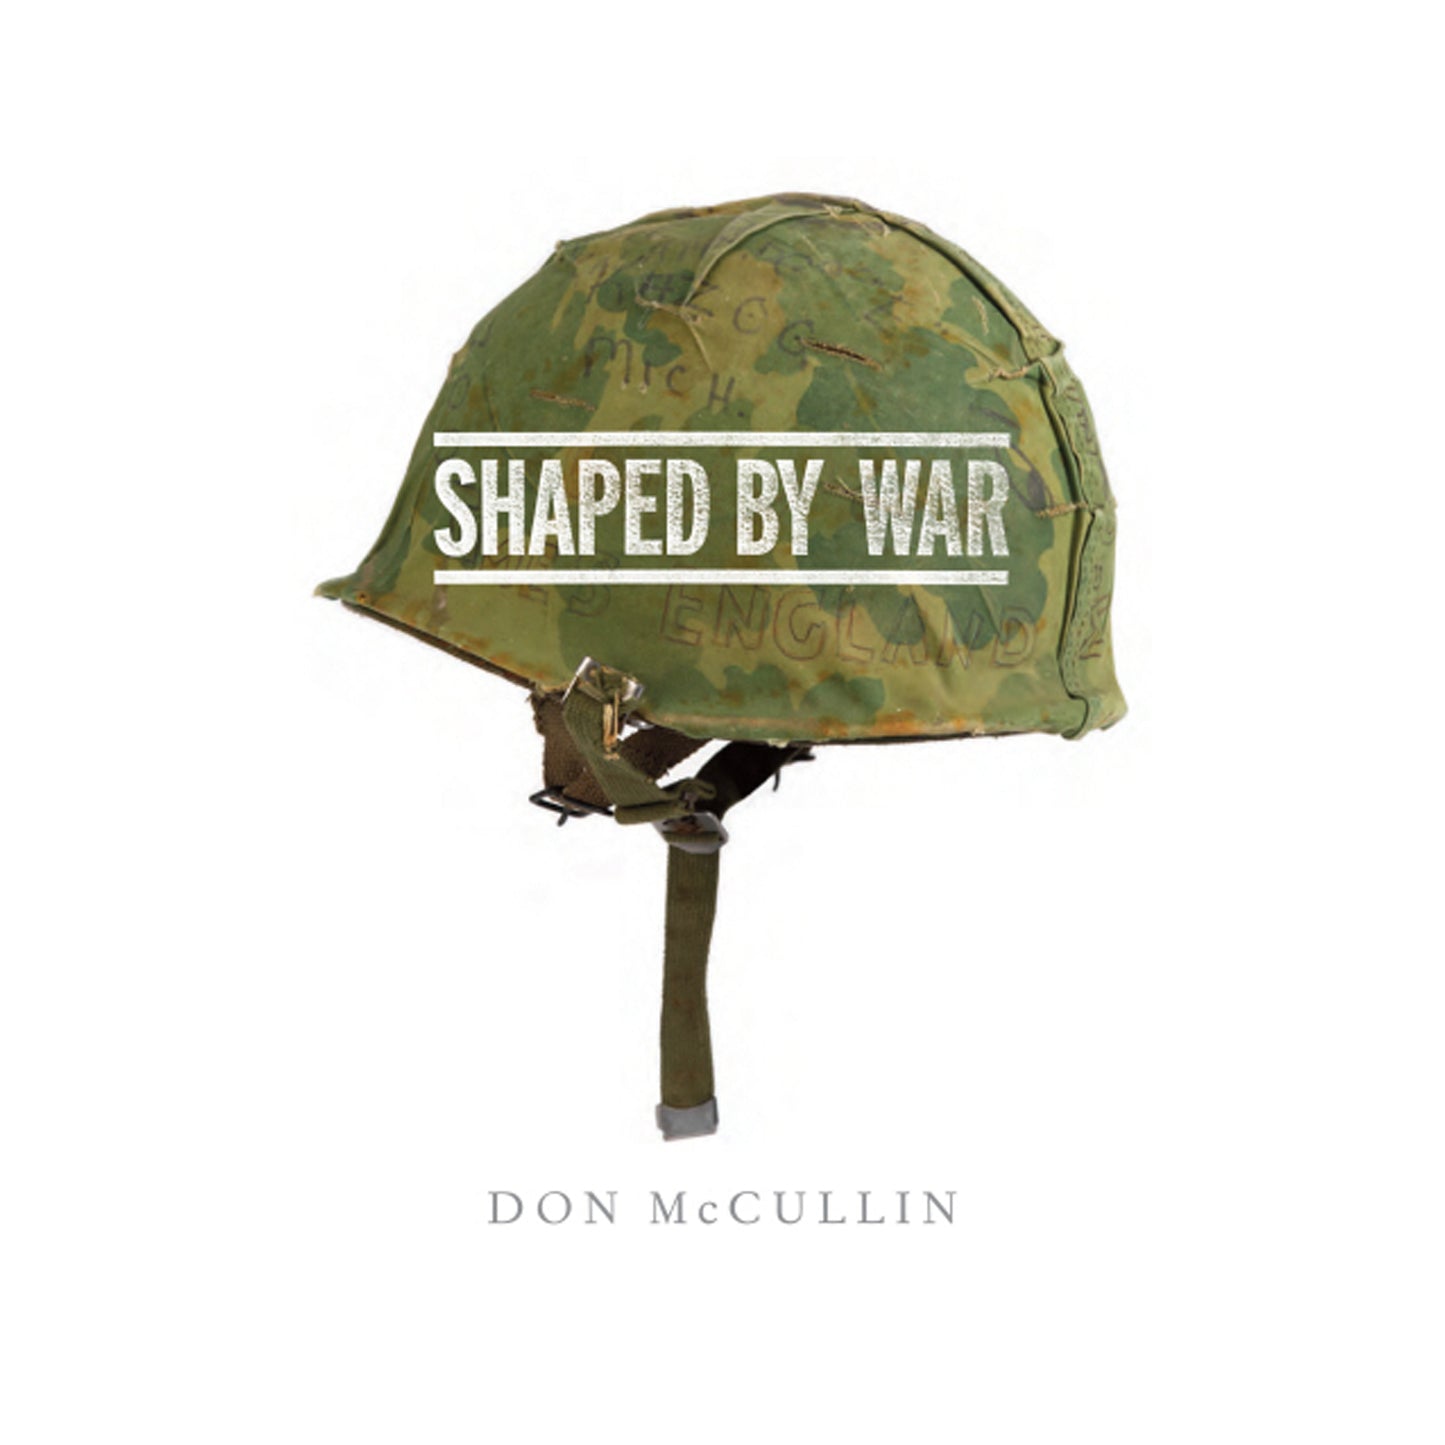 Shaped by War by Don McCullin Photo Museum Ireland